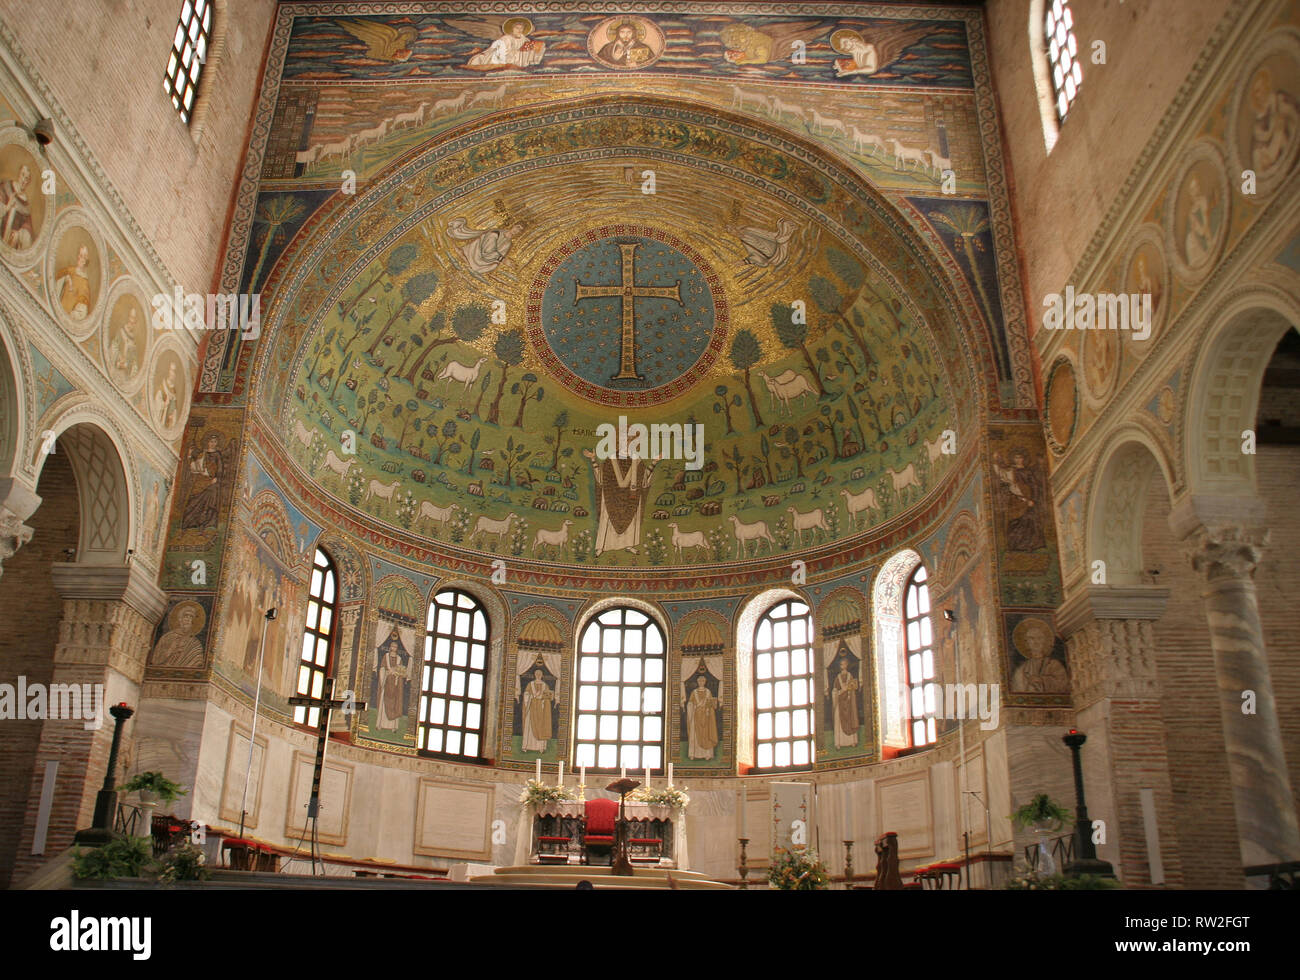 Italy. Ravenna. Basilica of Sant'Apollinare in Classe. Byzantine style. 6th CE. Apse with mosaics. Stock Photo